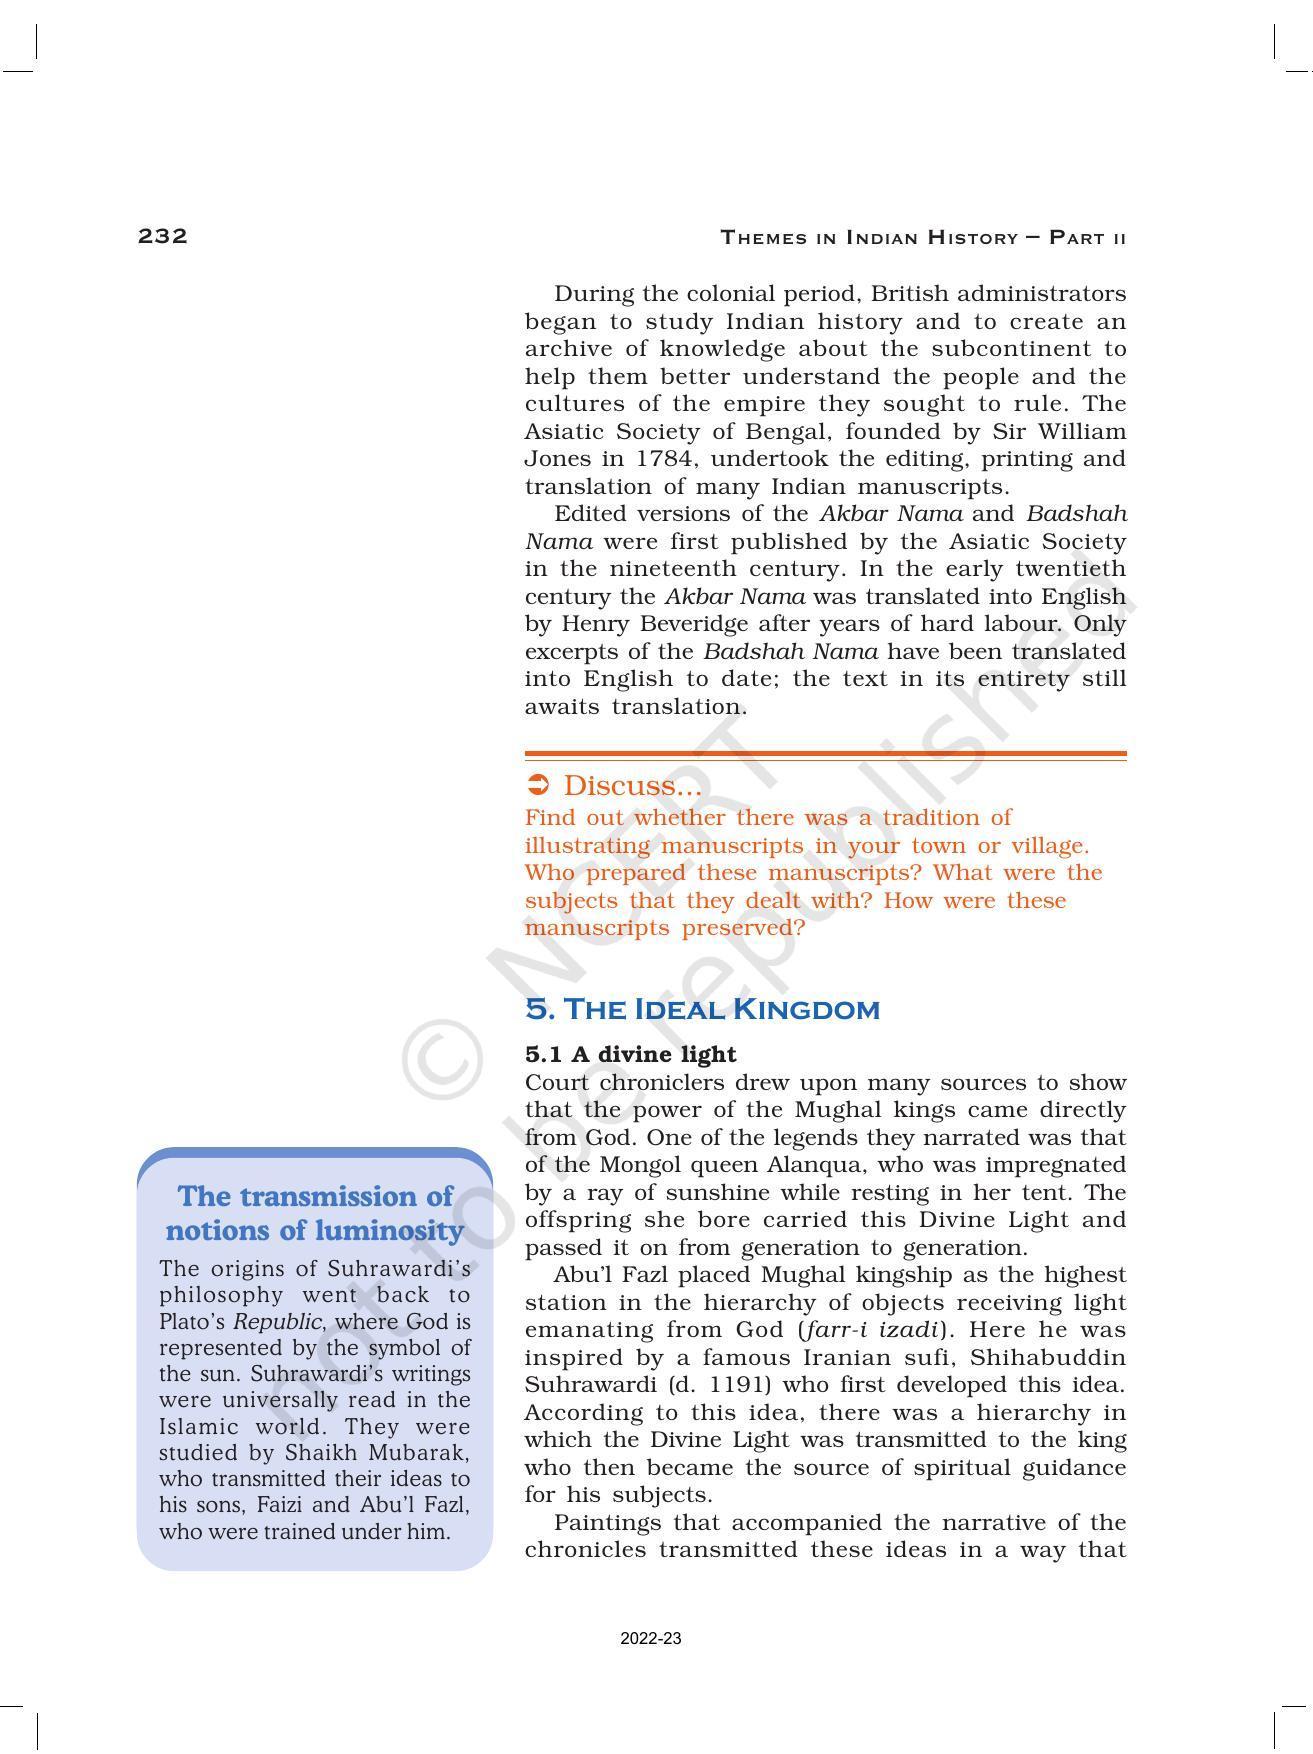 NCERT Book for Class 12 History (Part-II) Chapter 9 Kings and Chronicles - Page 9